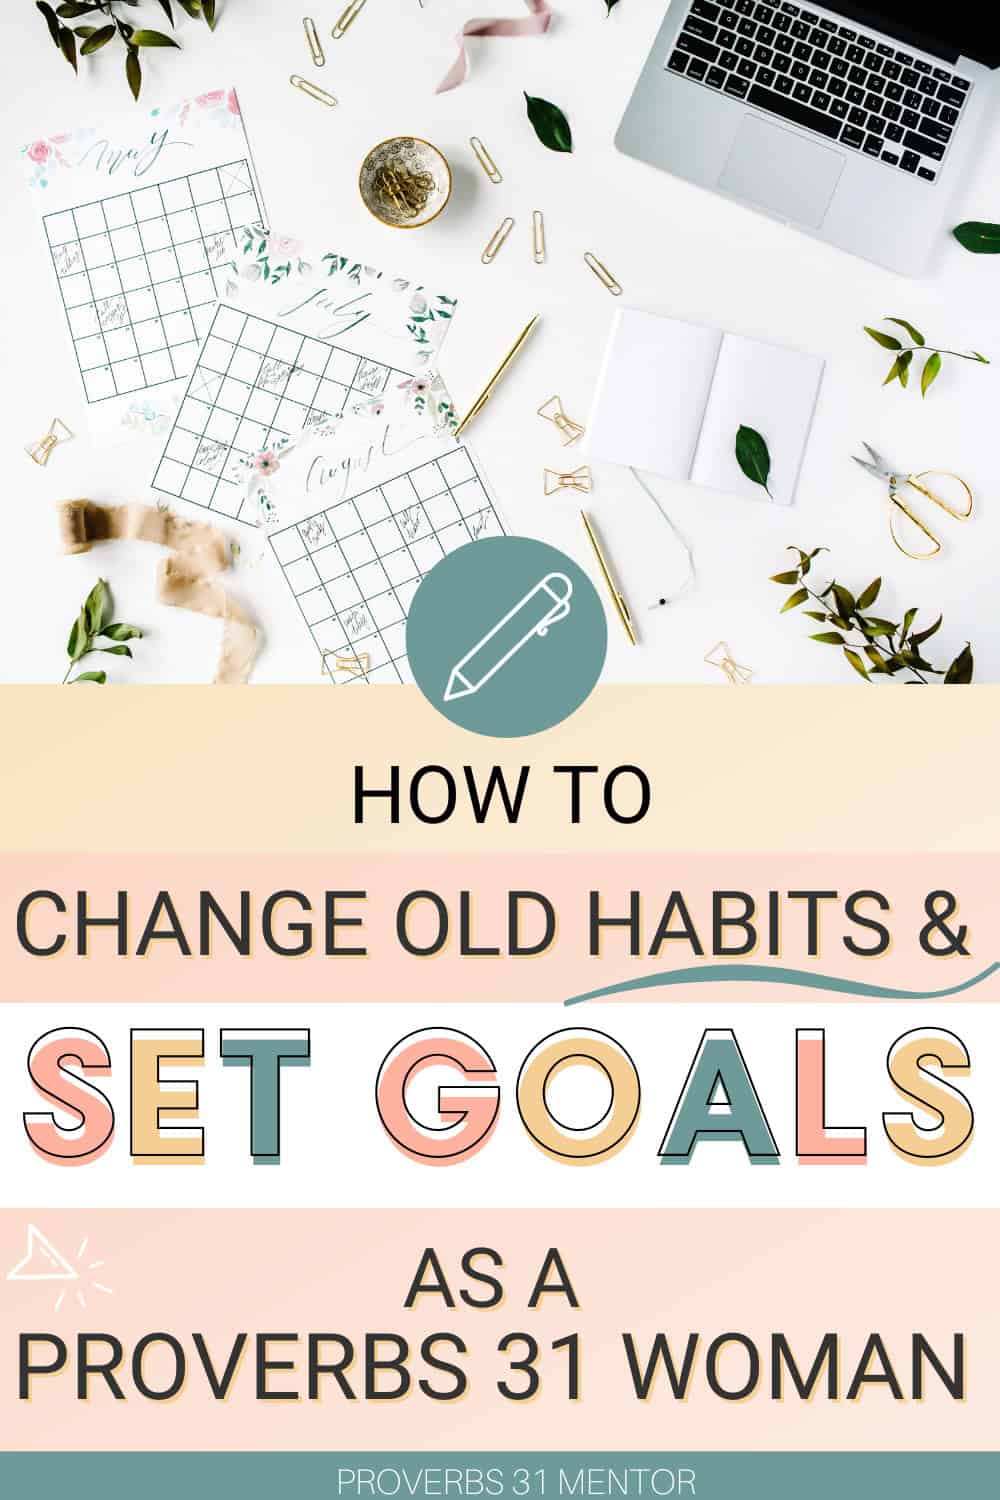 Title- How to change old habit and set goals as a Proverbs 31 woman- picture of calendars on a desk